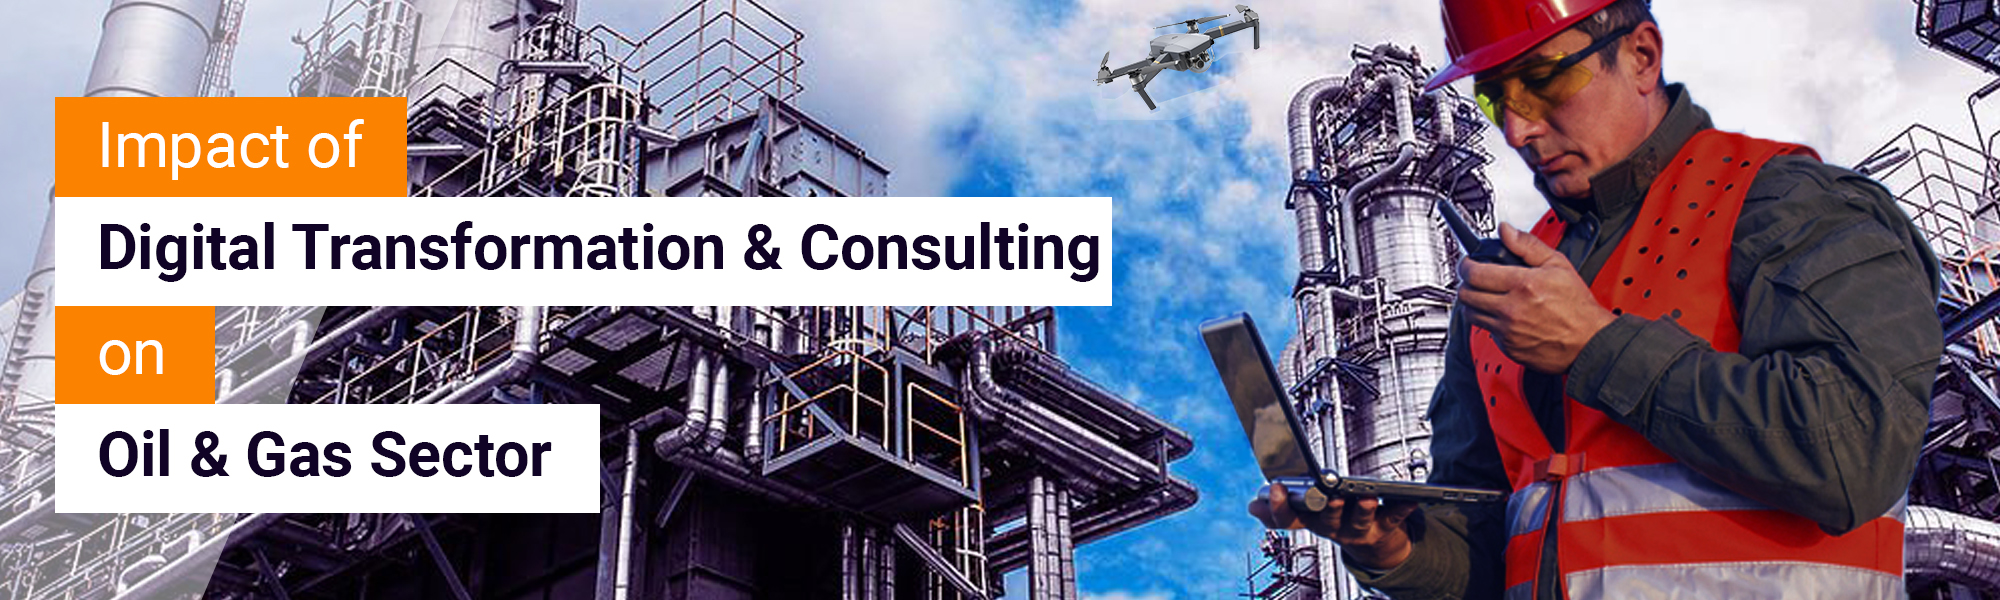 Impact of Digital Transformation & Consulting on Oil & Gas Sector